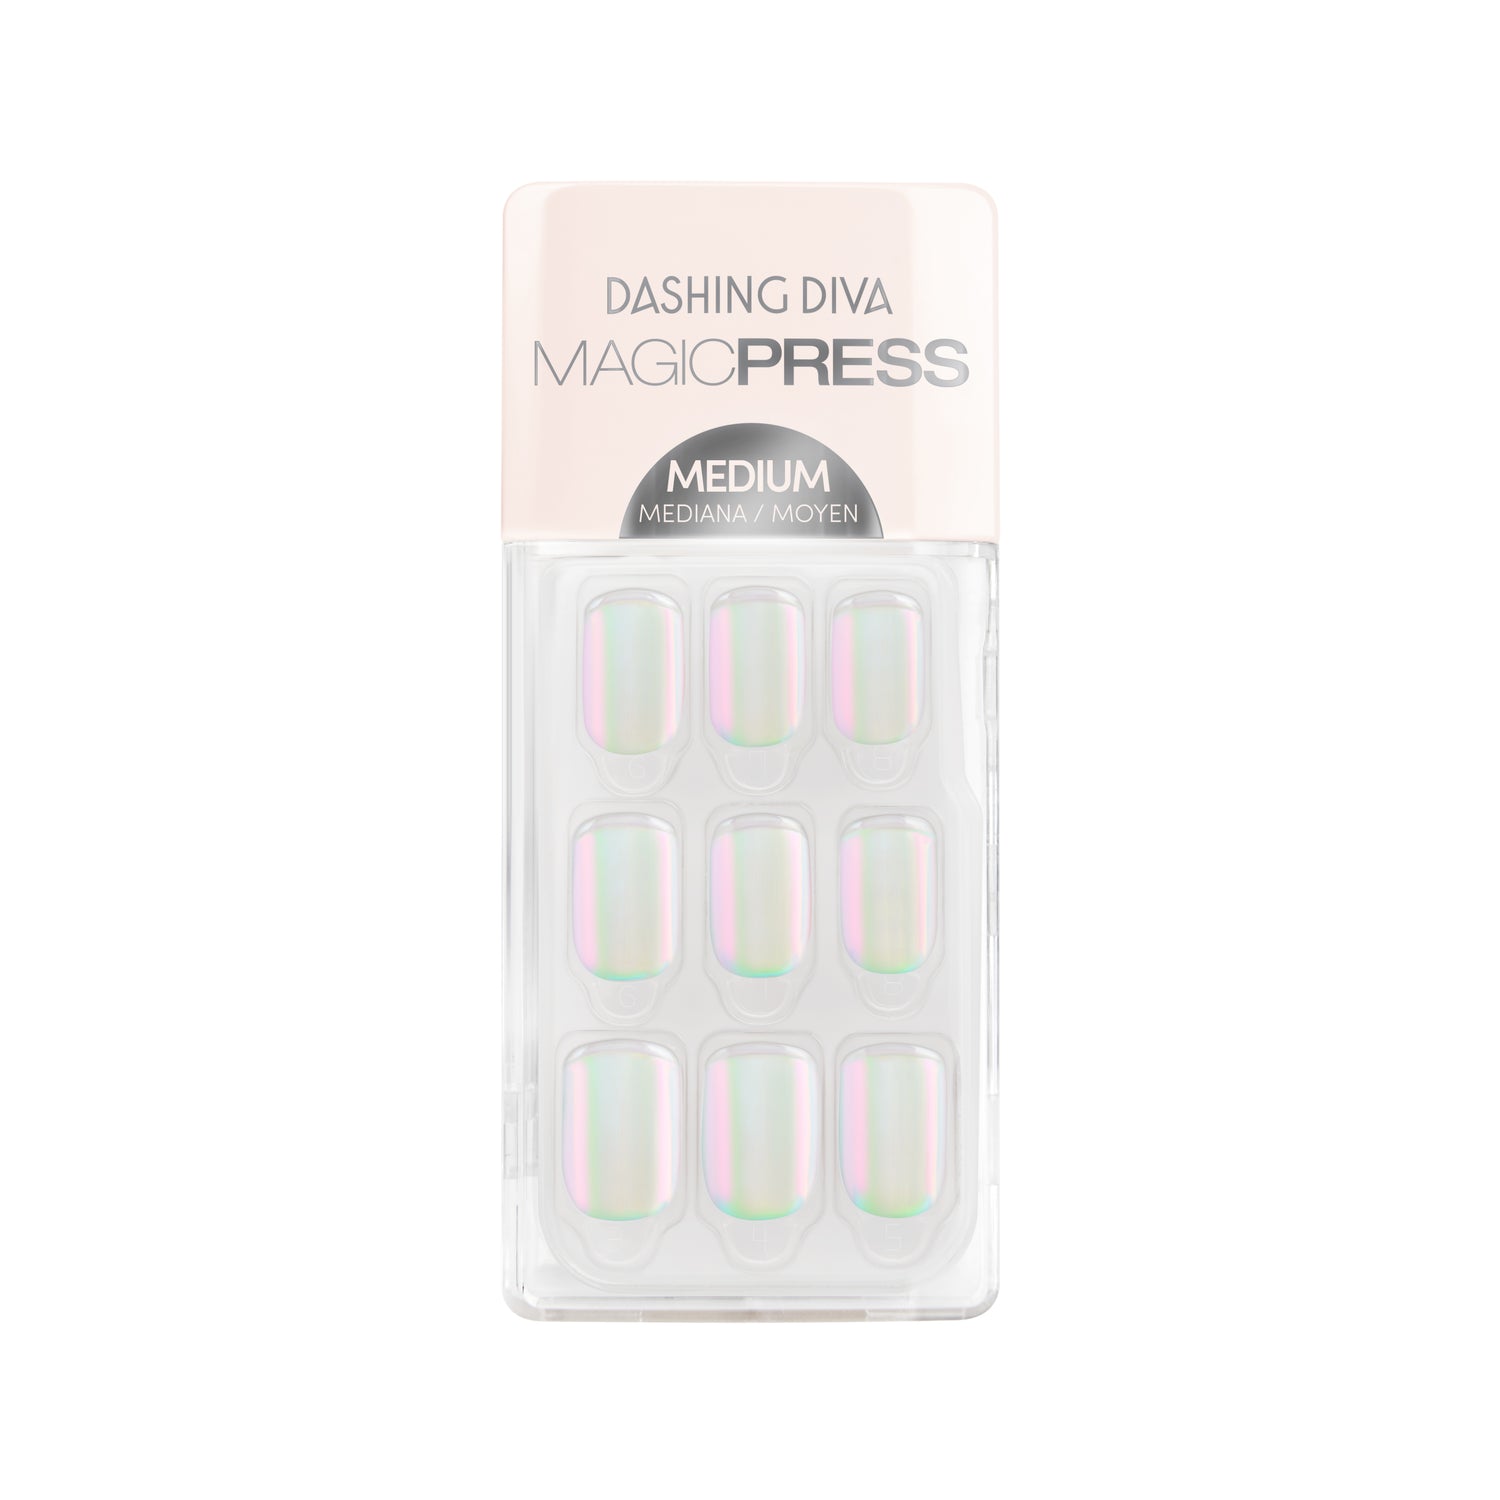 Dashing Diva MAGIC PRESS medium, square iridescent white press on gel nails with 3D french tips.